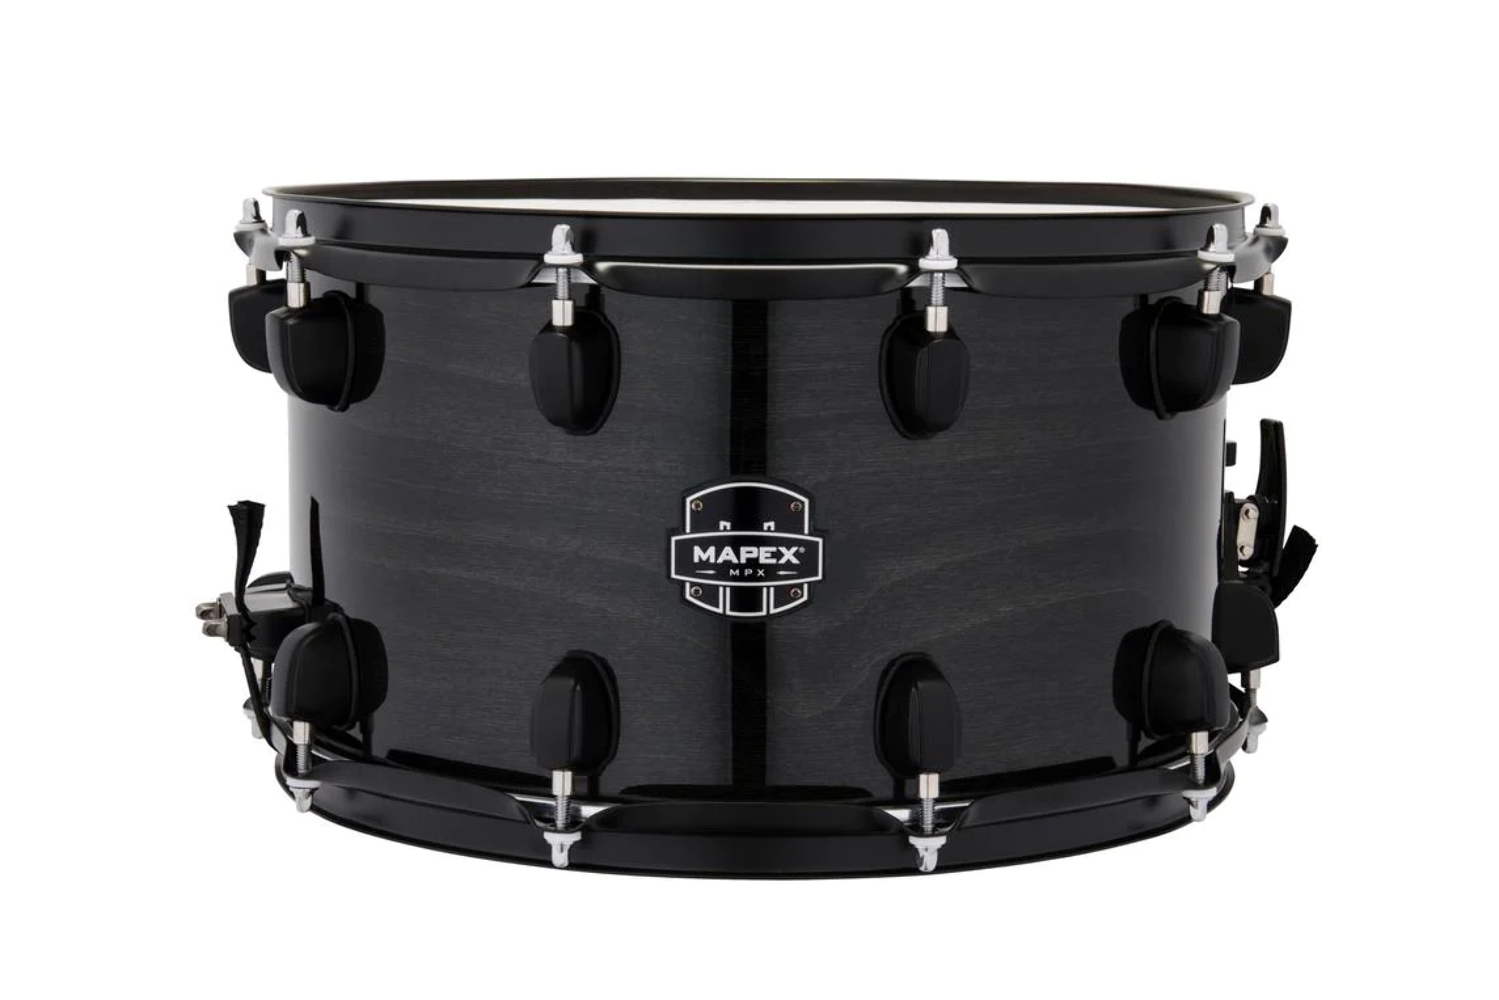 Mapex MPX Maple Snare Drum – 8 inch x 14 inch – Transparent Midnight Black 1